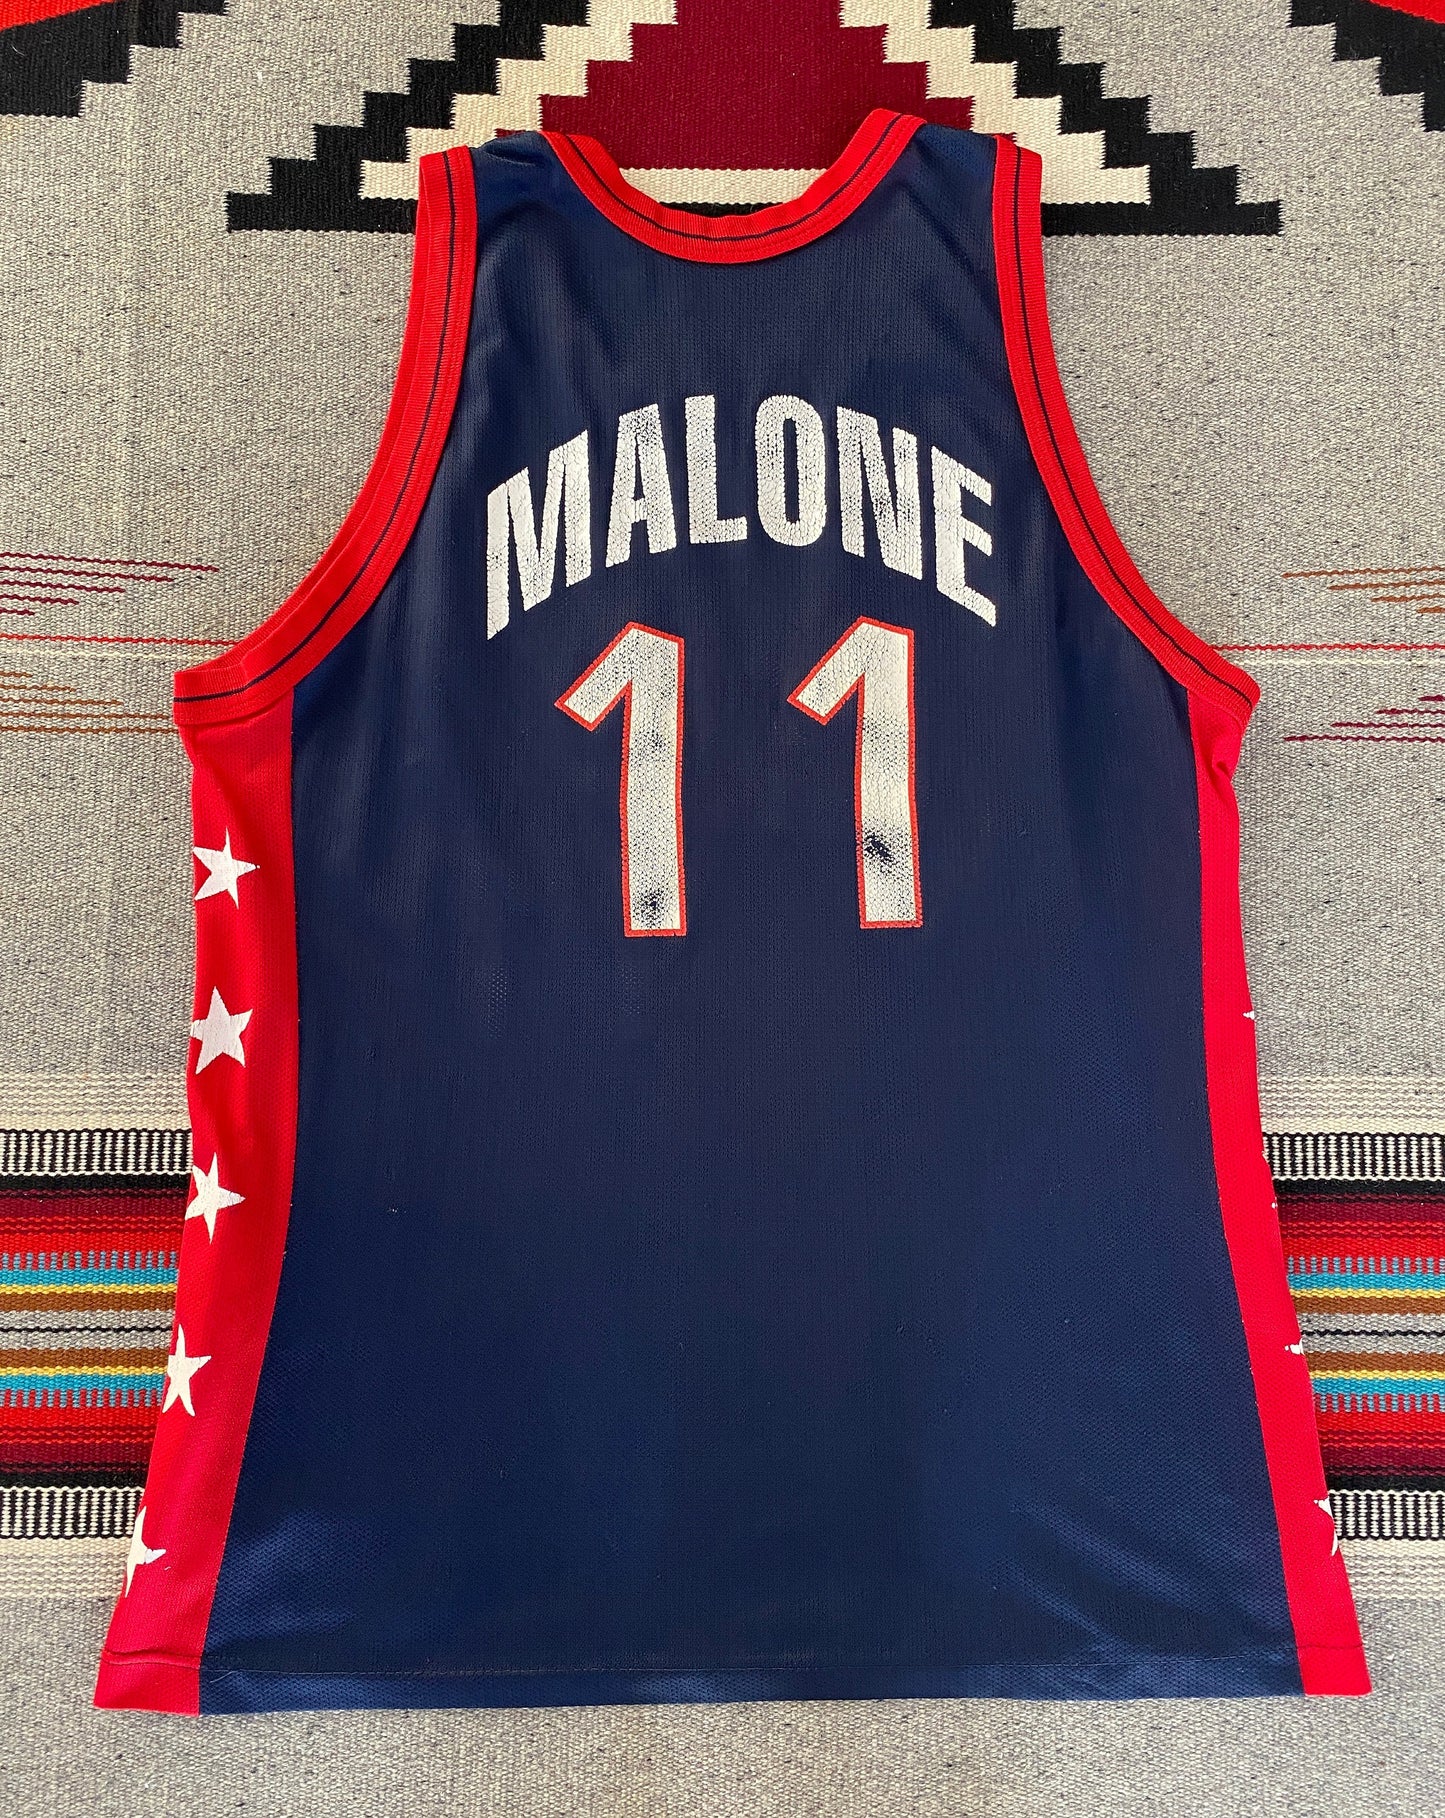 Size 48 Carl Malone #11 Vintage Dream Team Olympic Champion NBA Jersey - Made in USA - back View